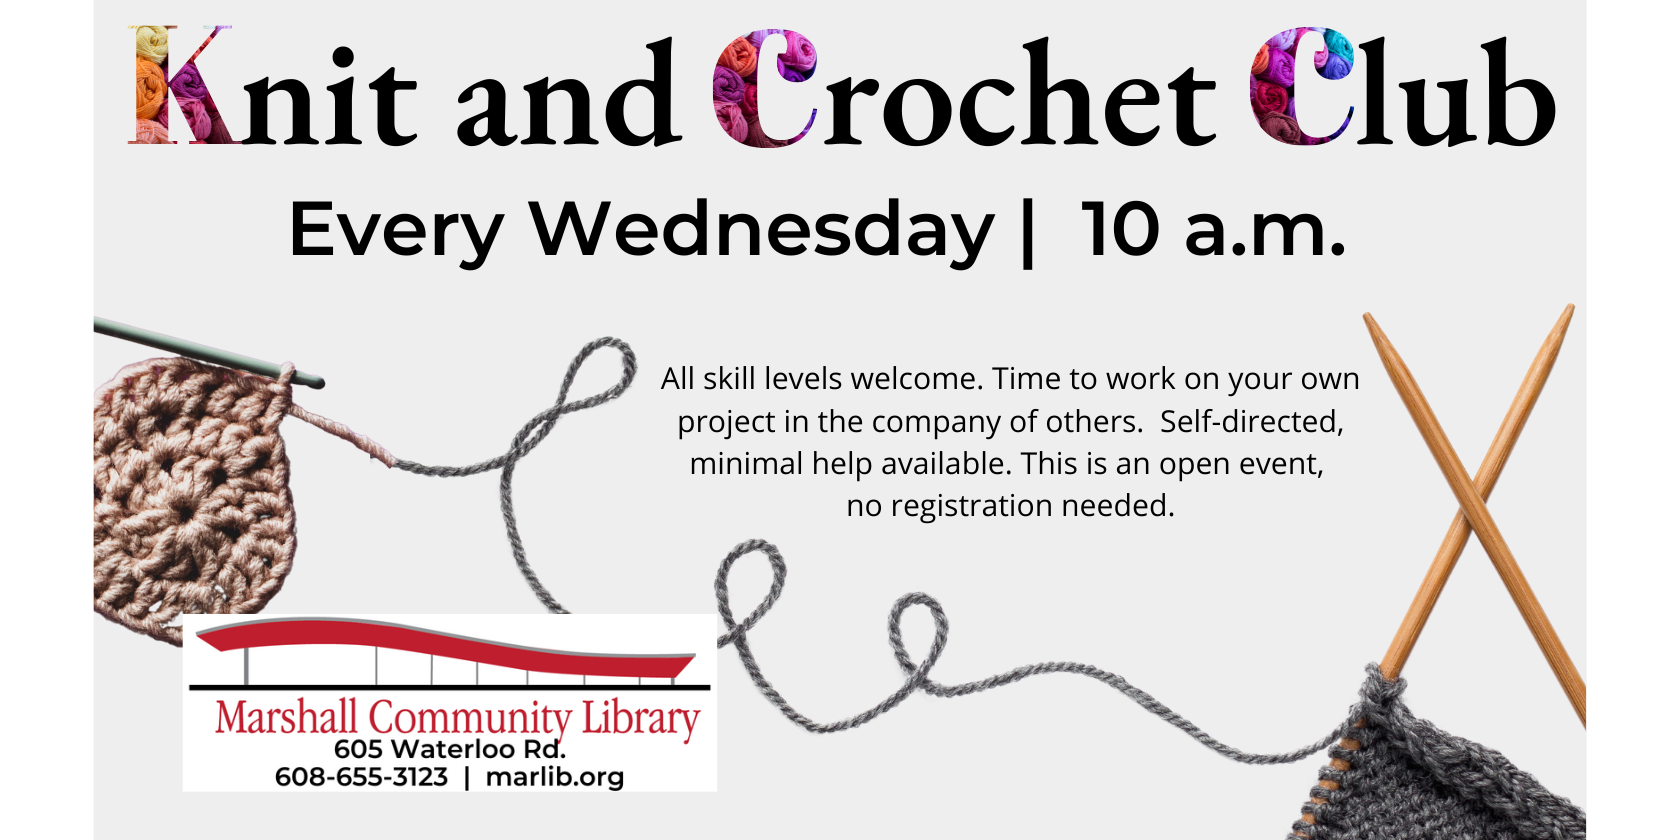 Knit and Crochet club Wednesdays at 10 a.m.